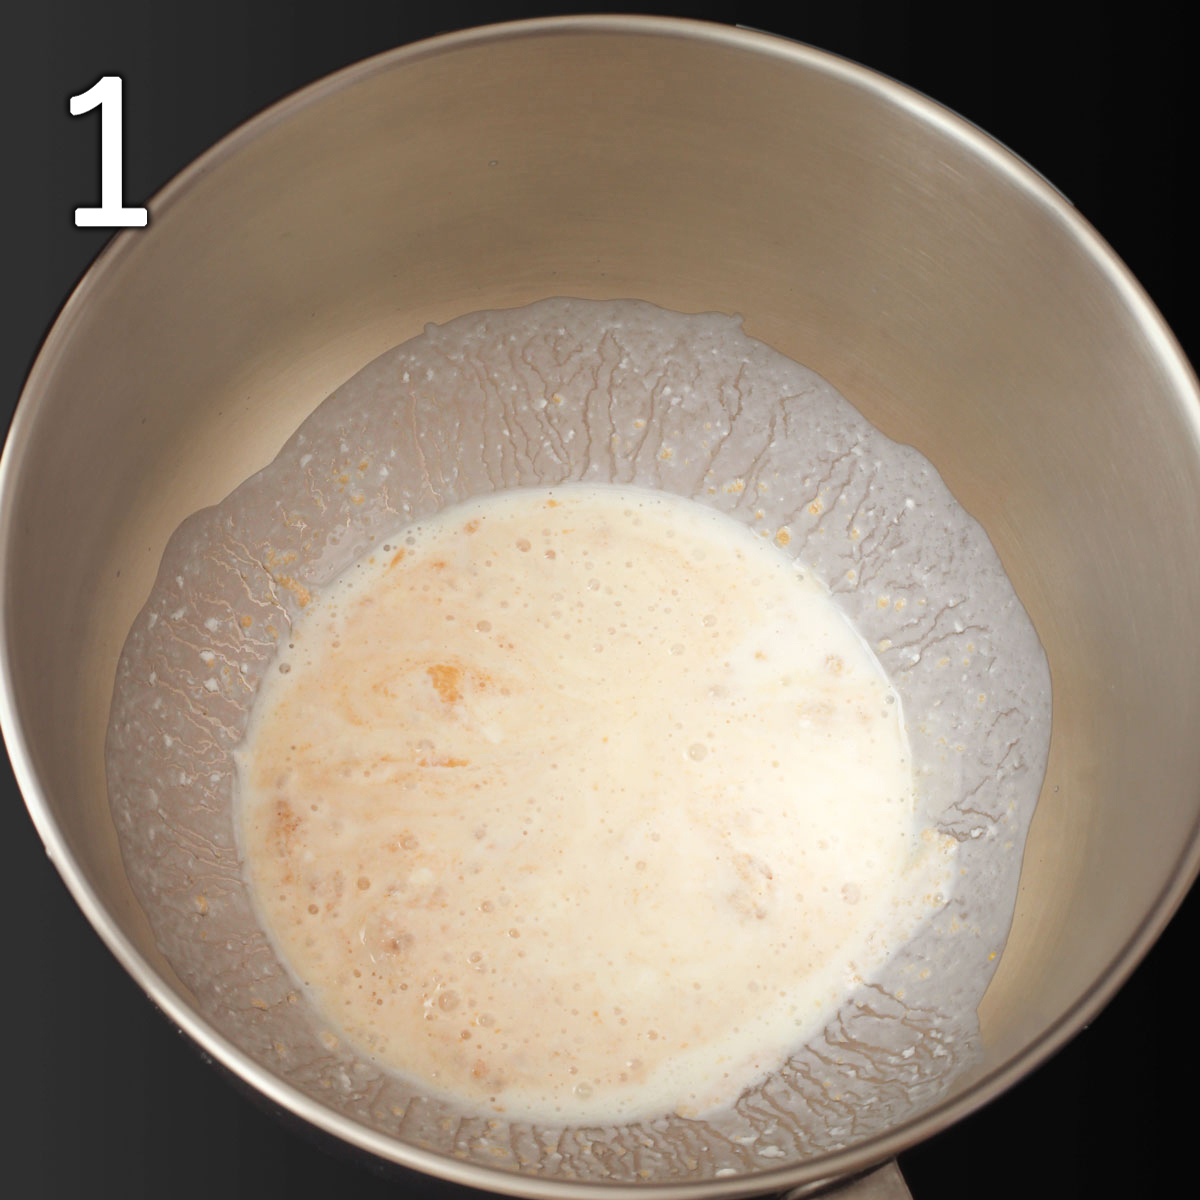 yeast proofing with milk and sugar in mixing bowl.